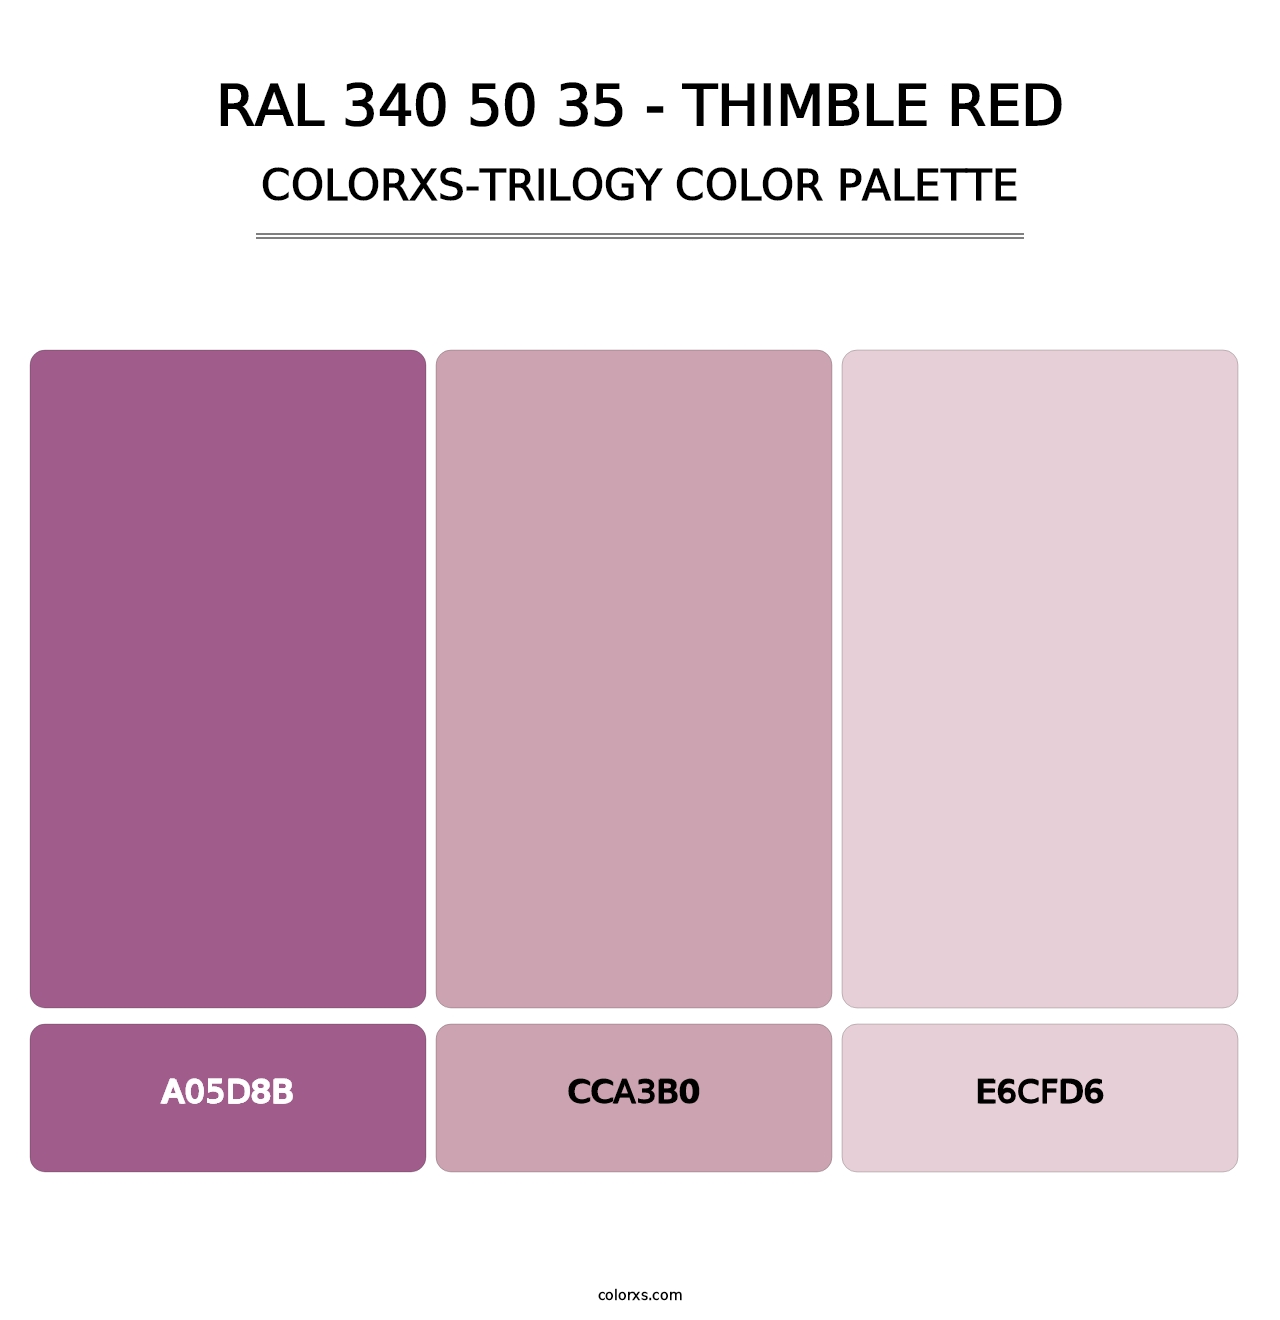 RAL 340 50 35 - Thimble Red - Colorxs Trilogy Palette